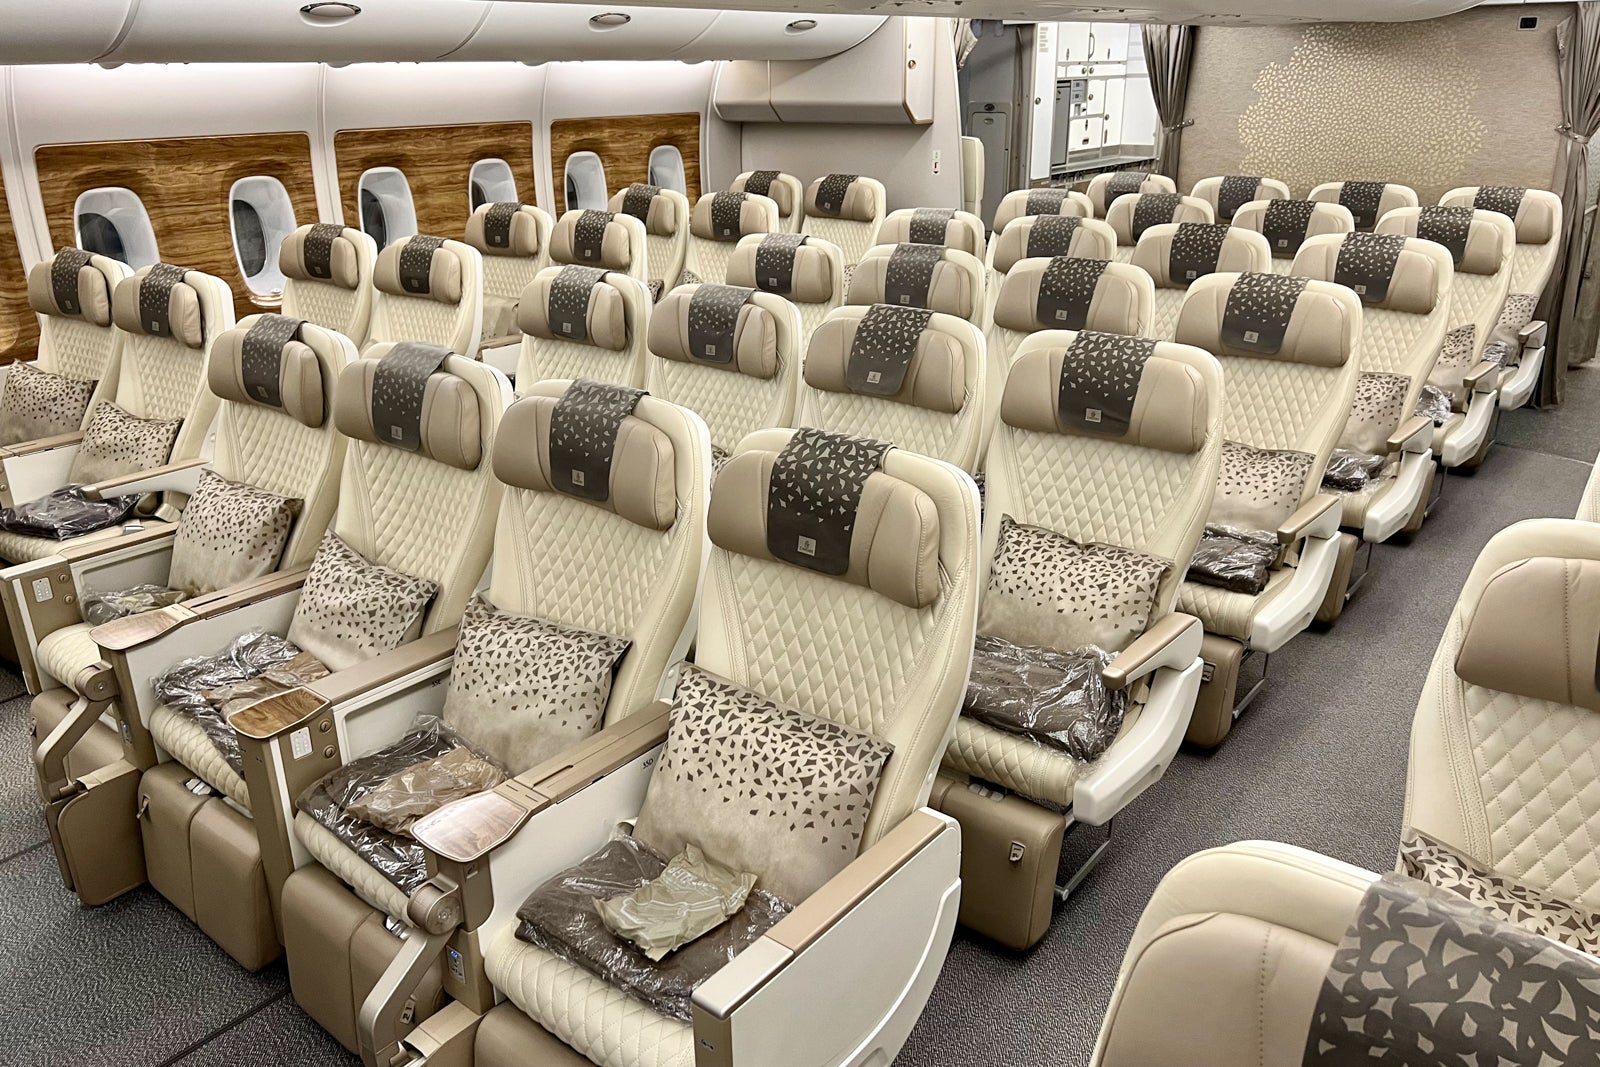 A Review Of Emirates' New Premium Economy On The A380 From, 50% OFF